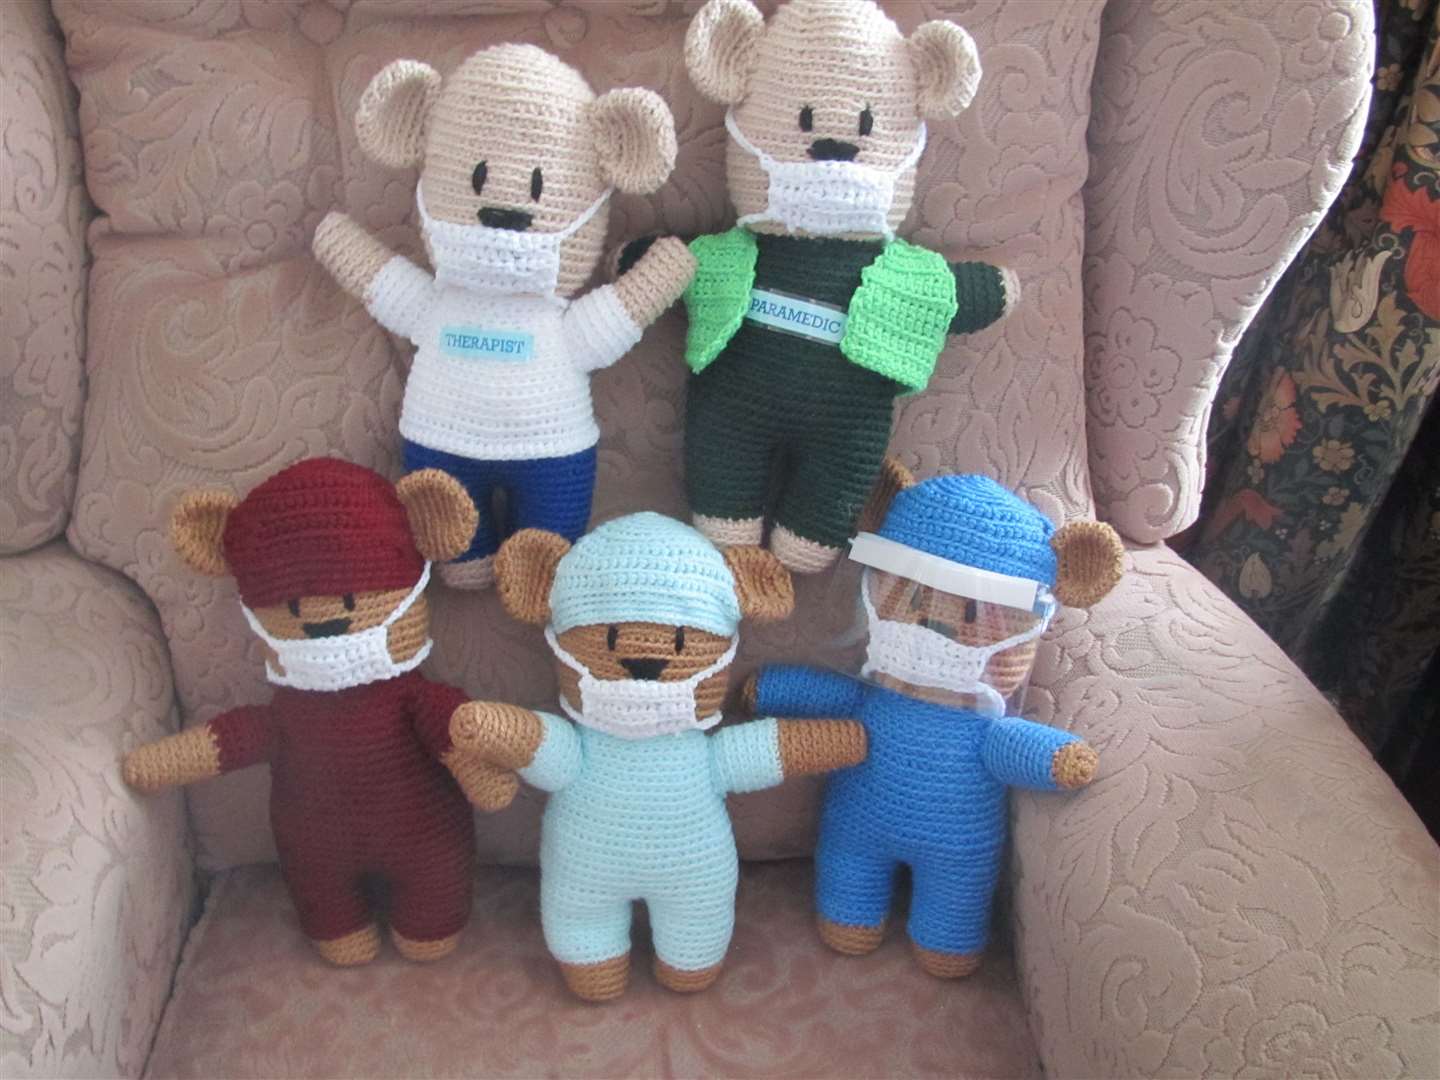 Pam has been creating a variety of bears since the start of lockdown.